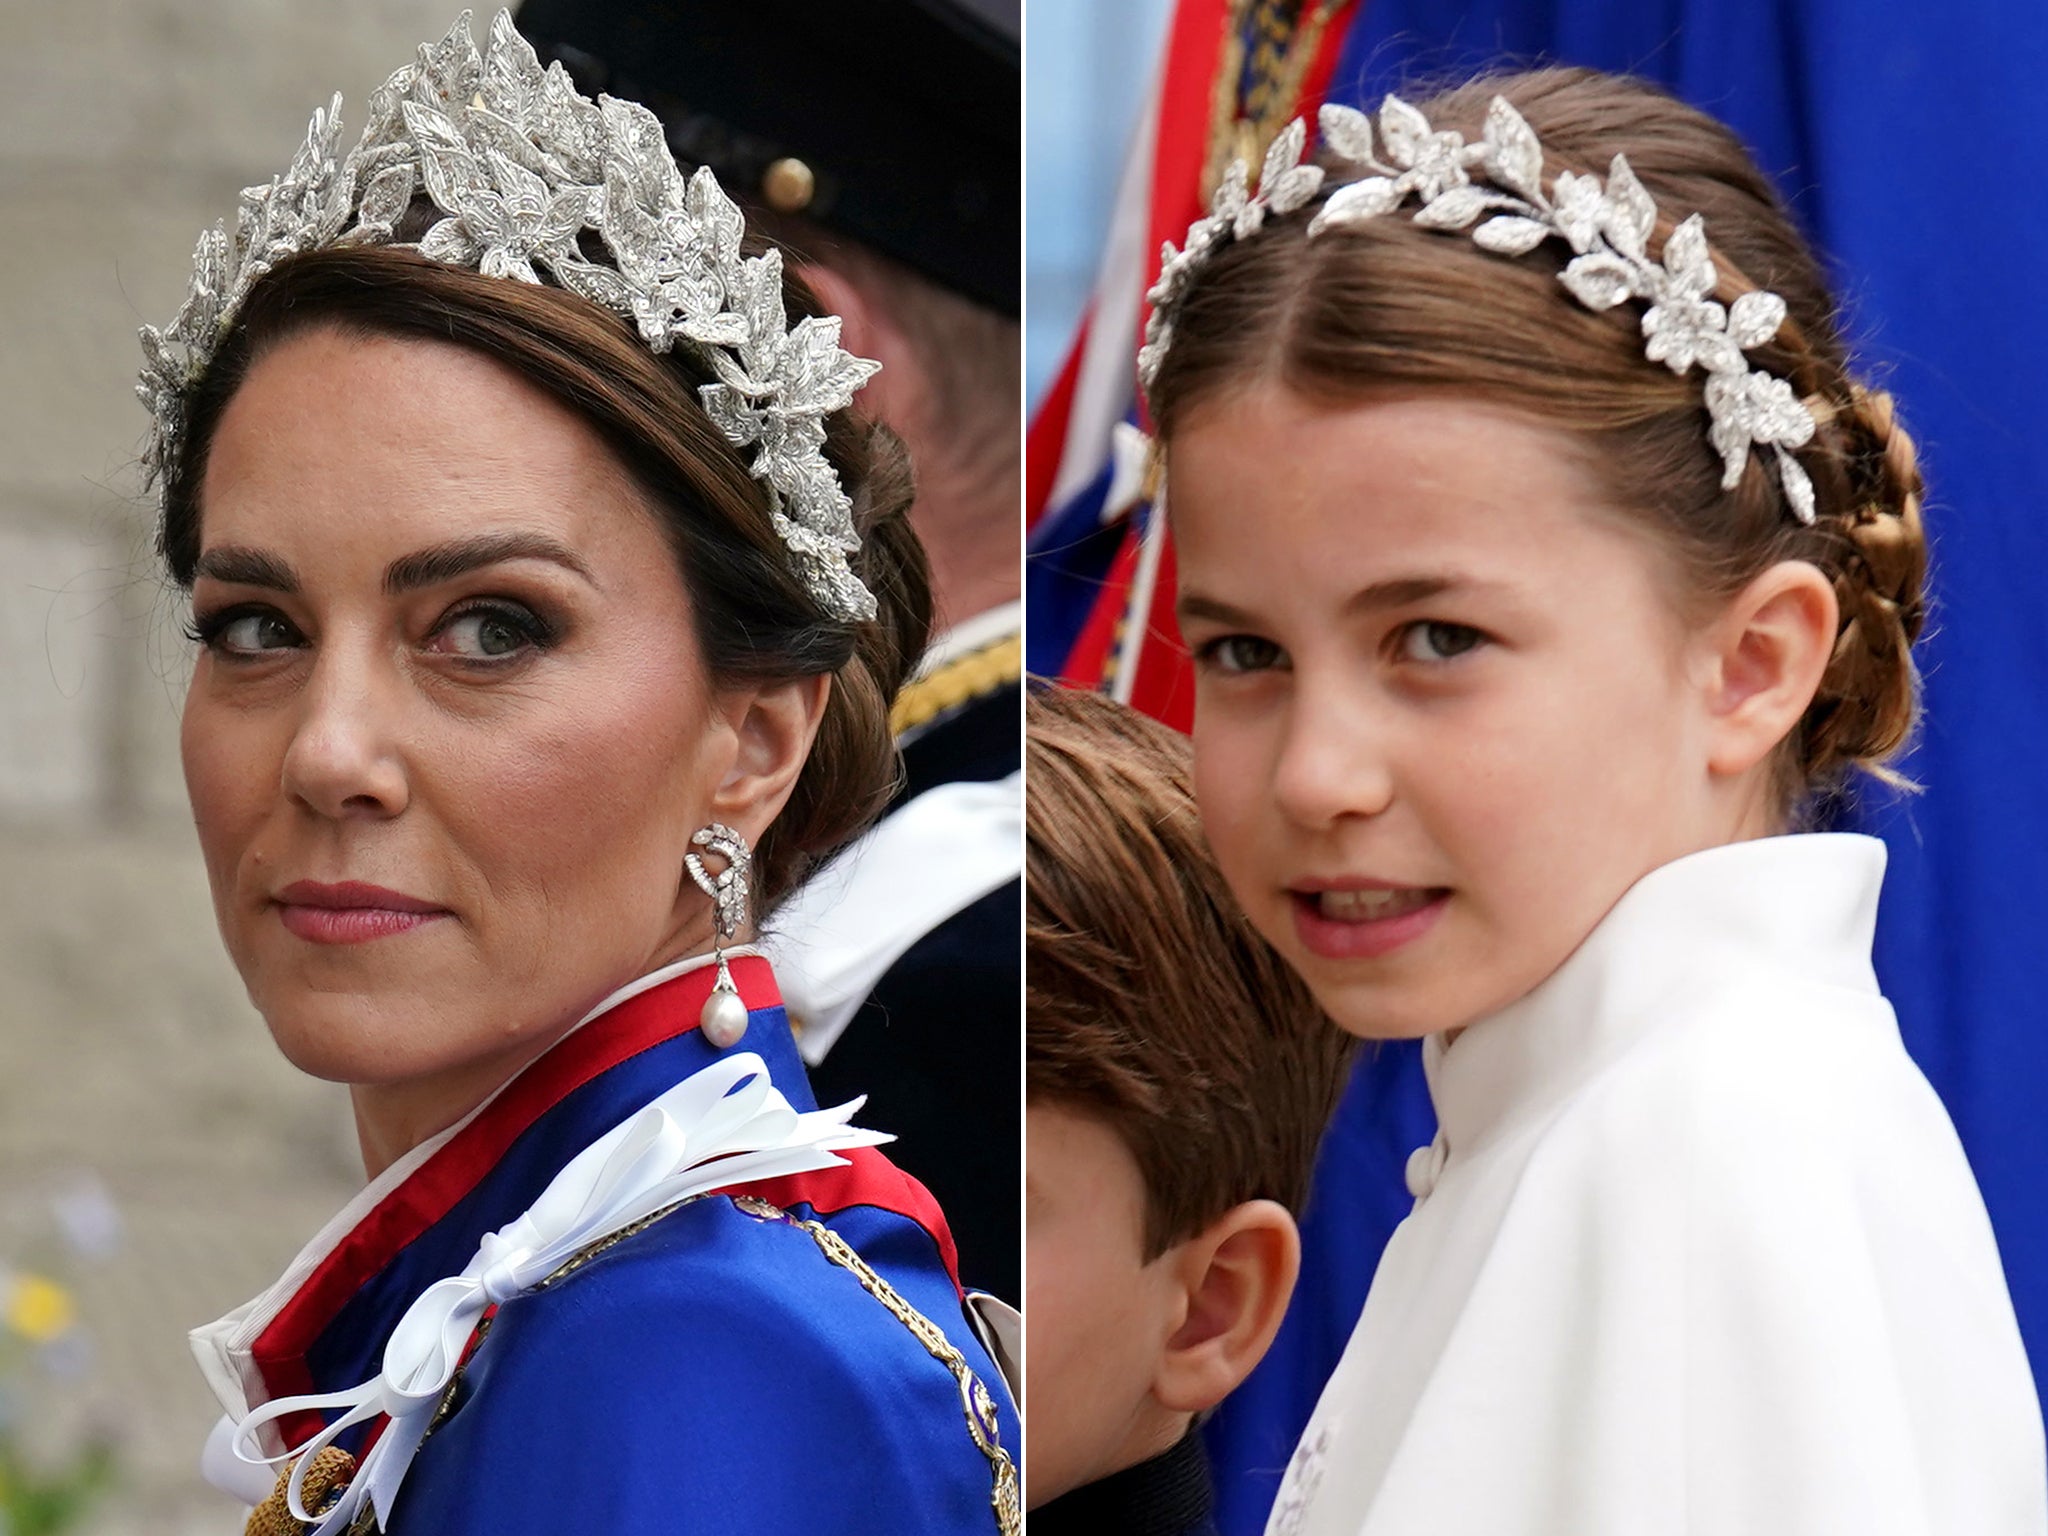 Kate Middleton's coronation Where is it from and how much is it worth? | The Independent